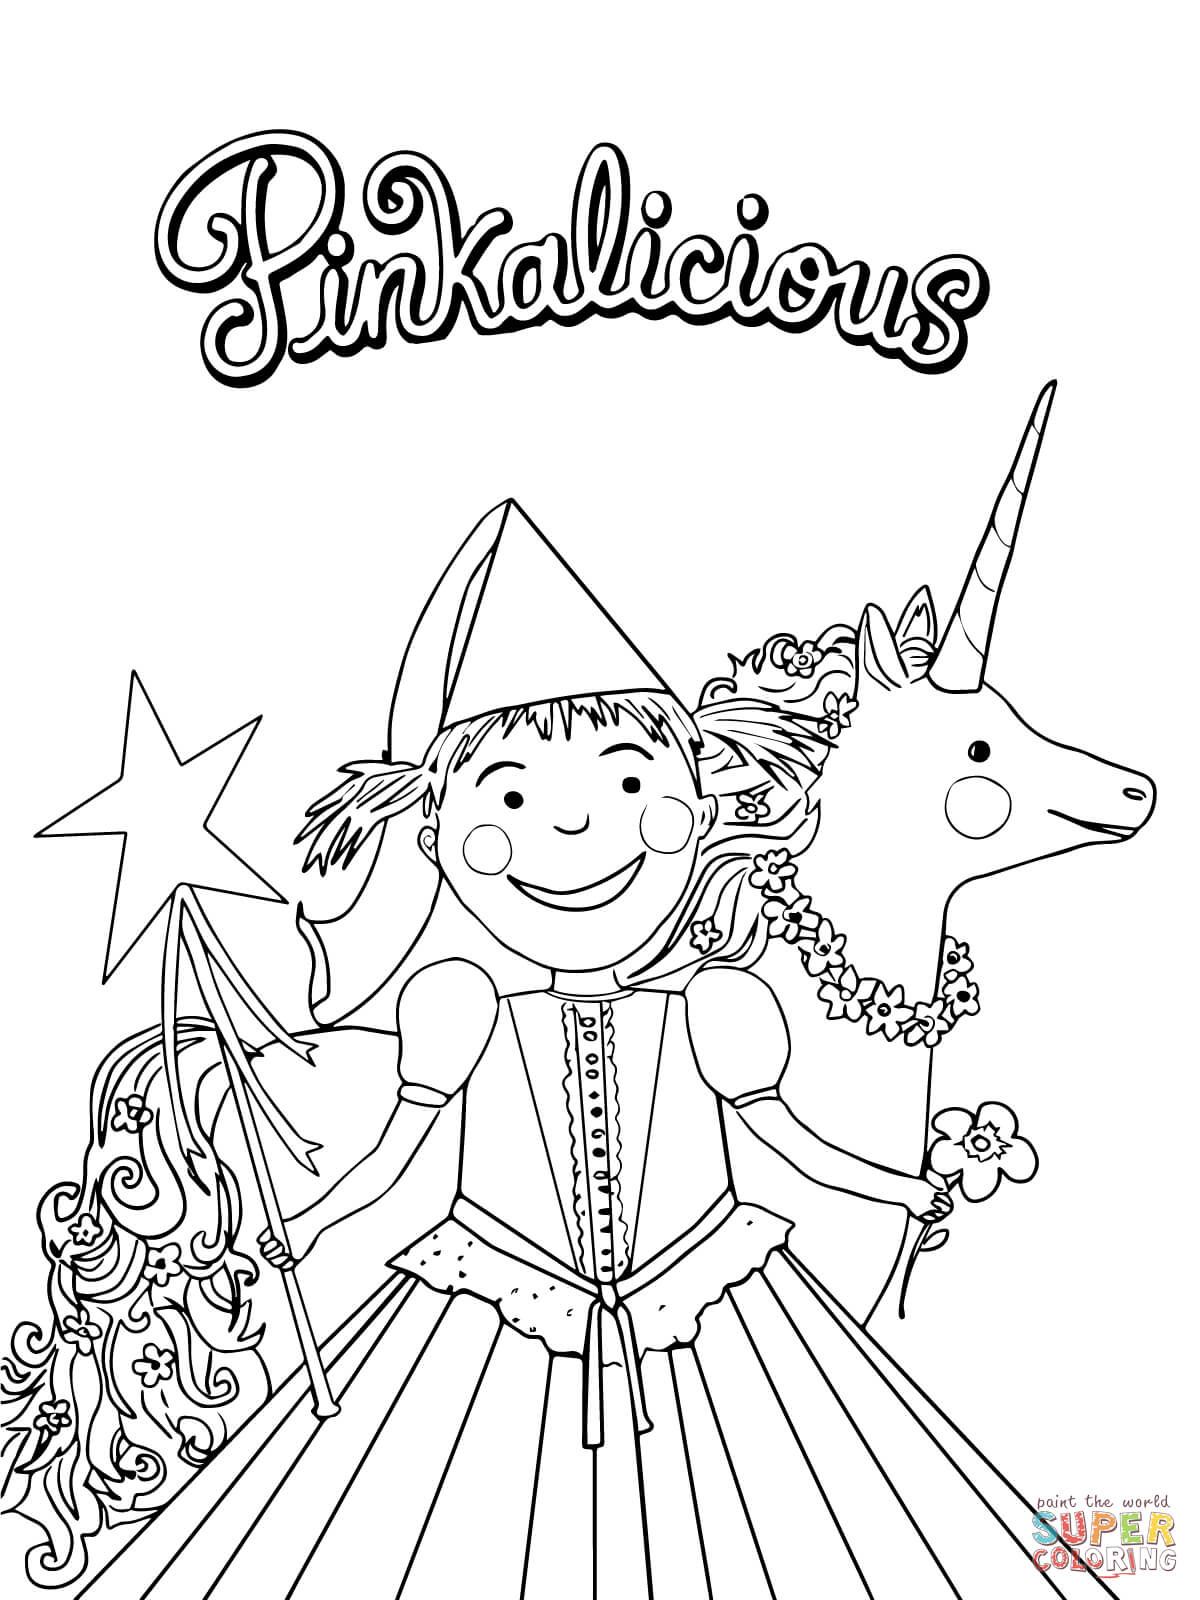 Pinkalicious coloring pages to download and print for free